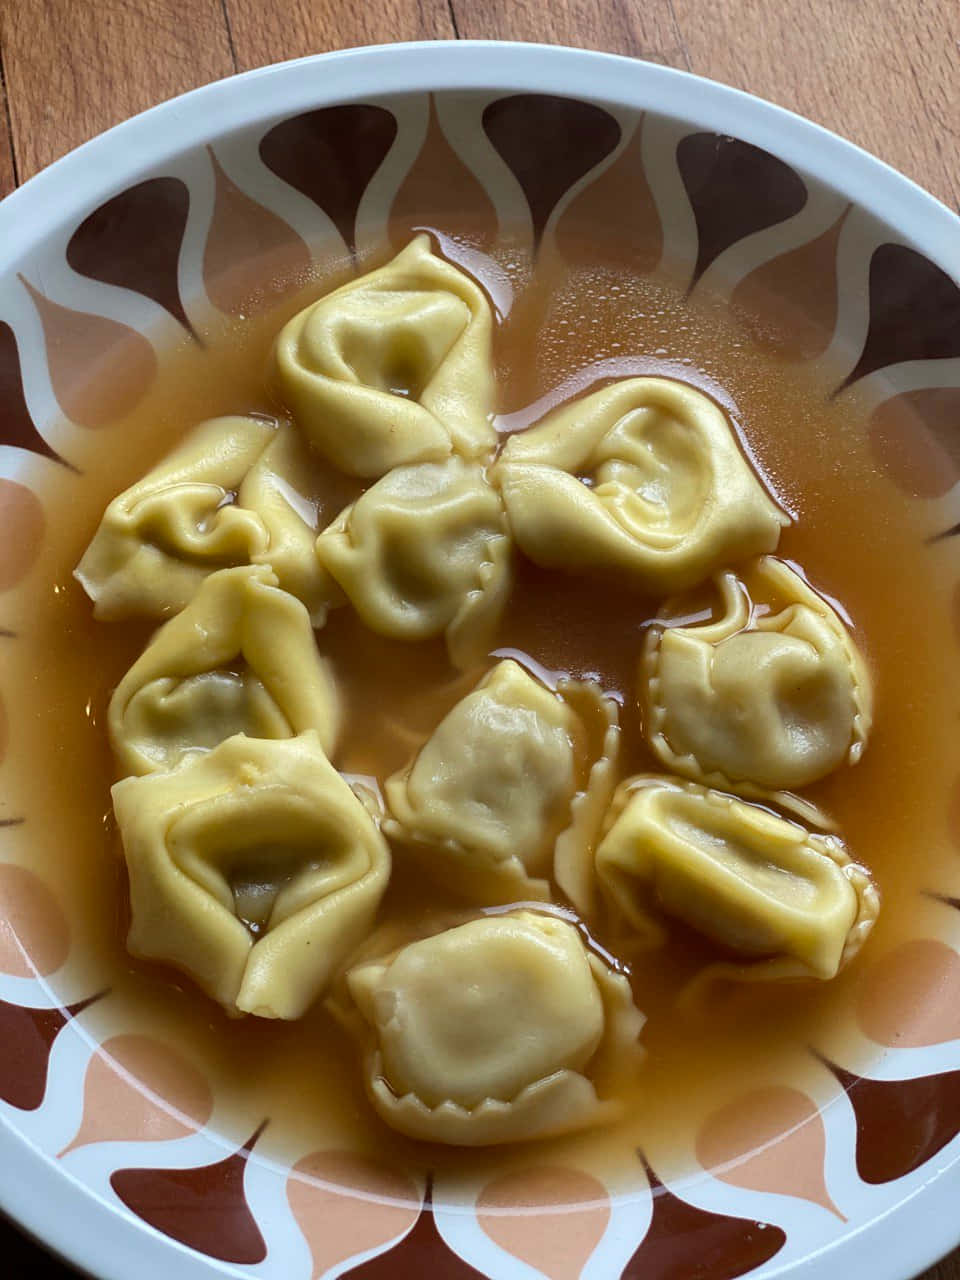 Savory Home-Cooked Tortellini in Brodo Wallpaper